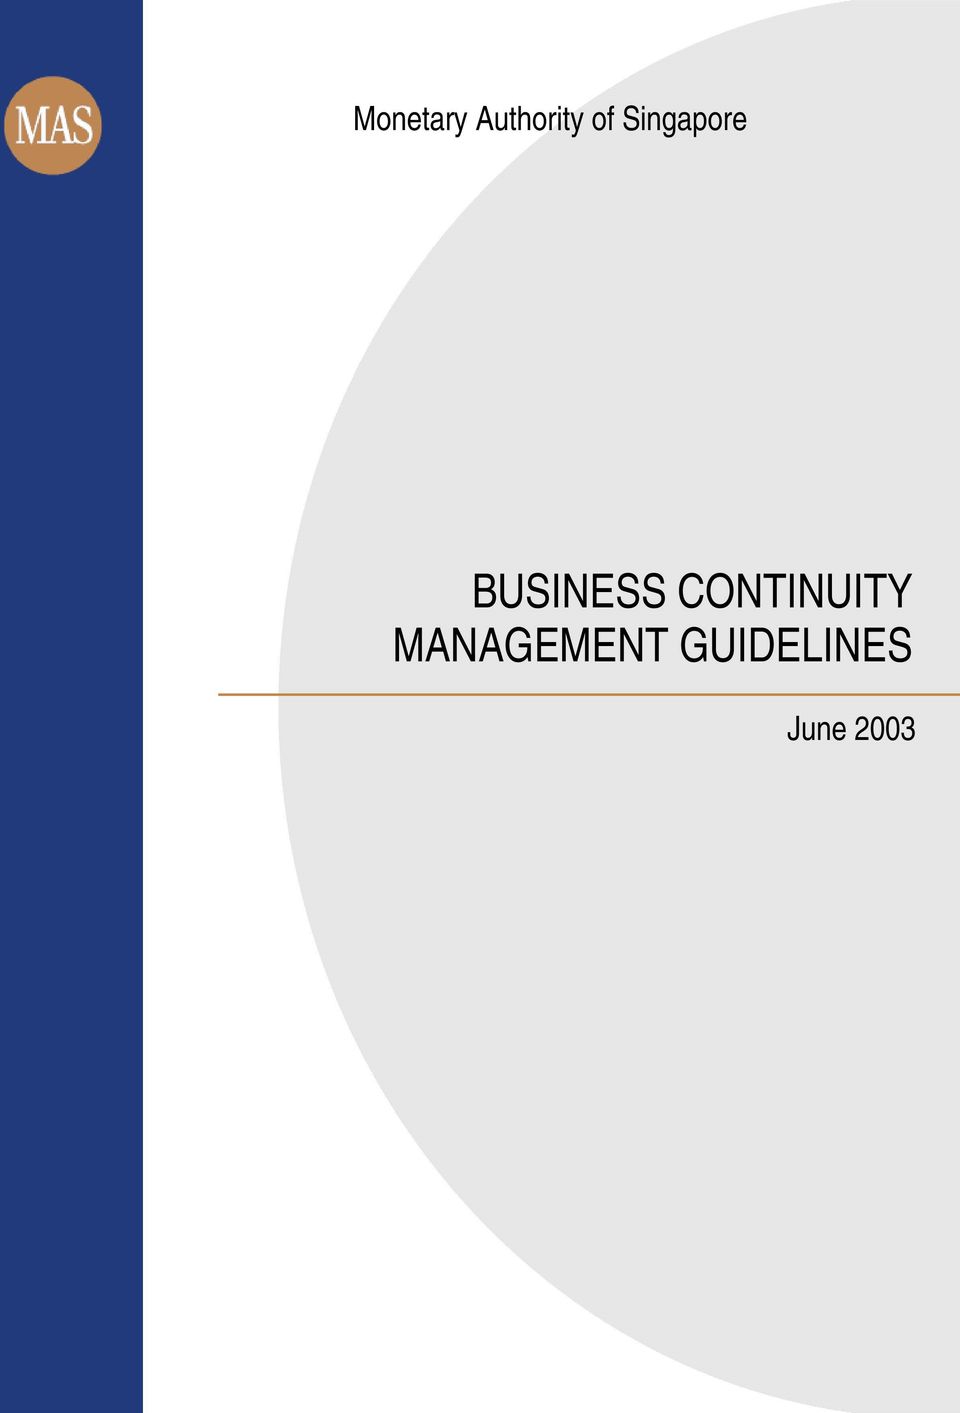 BUSINESS CONTINUITY